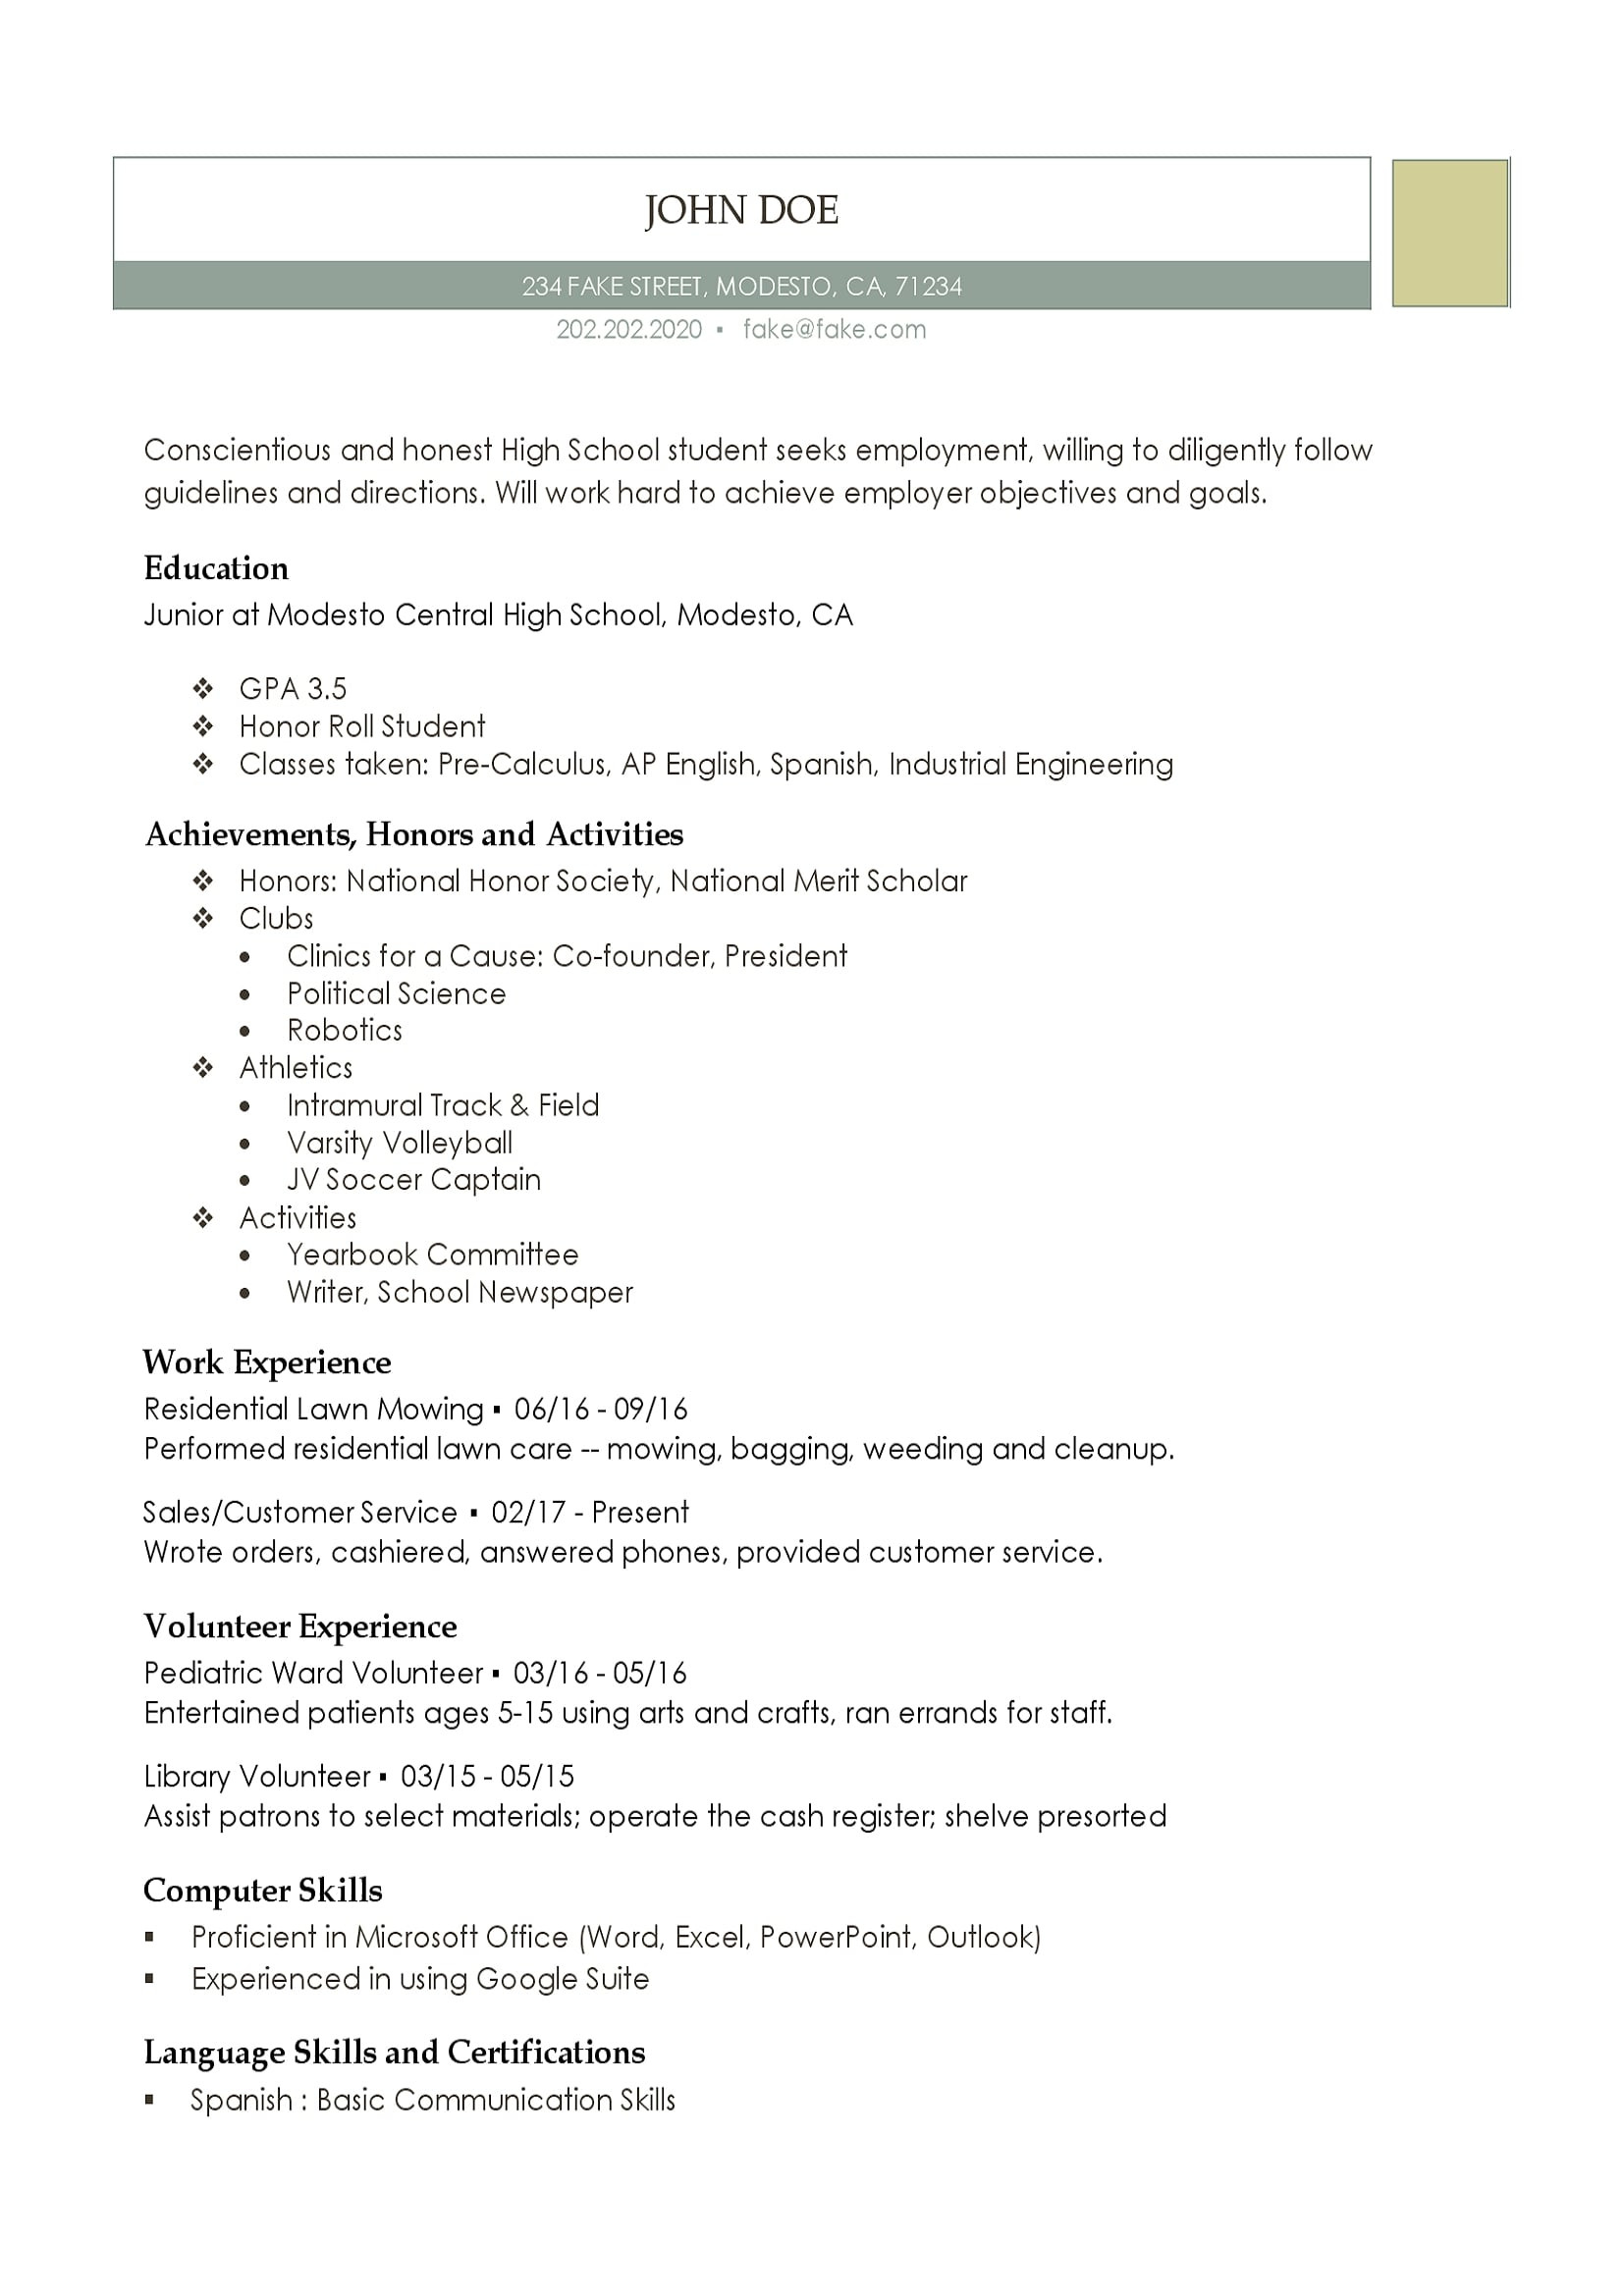 High School Student athlete Resume Template High School Resume – Resume Templates for High School Students and …